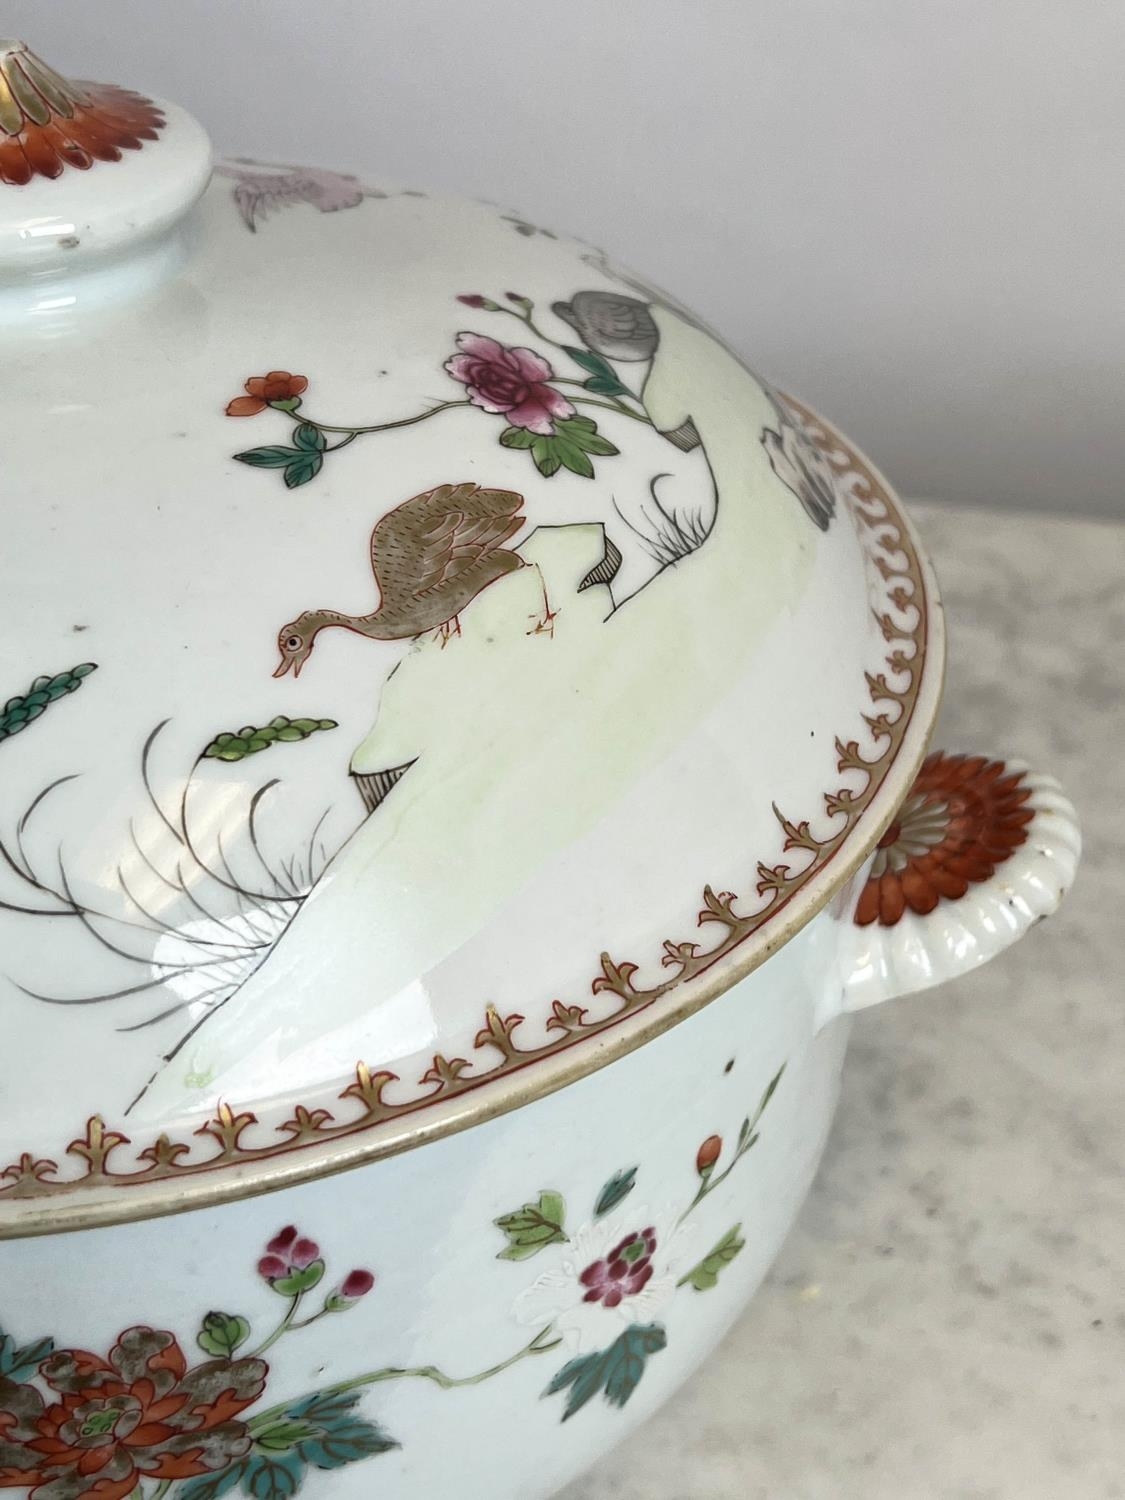 CHINESE EXPORT SOUP TUREEN, 19th century famille rose, decorated with cranes in garden scenes. - Image 7 of 9